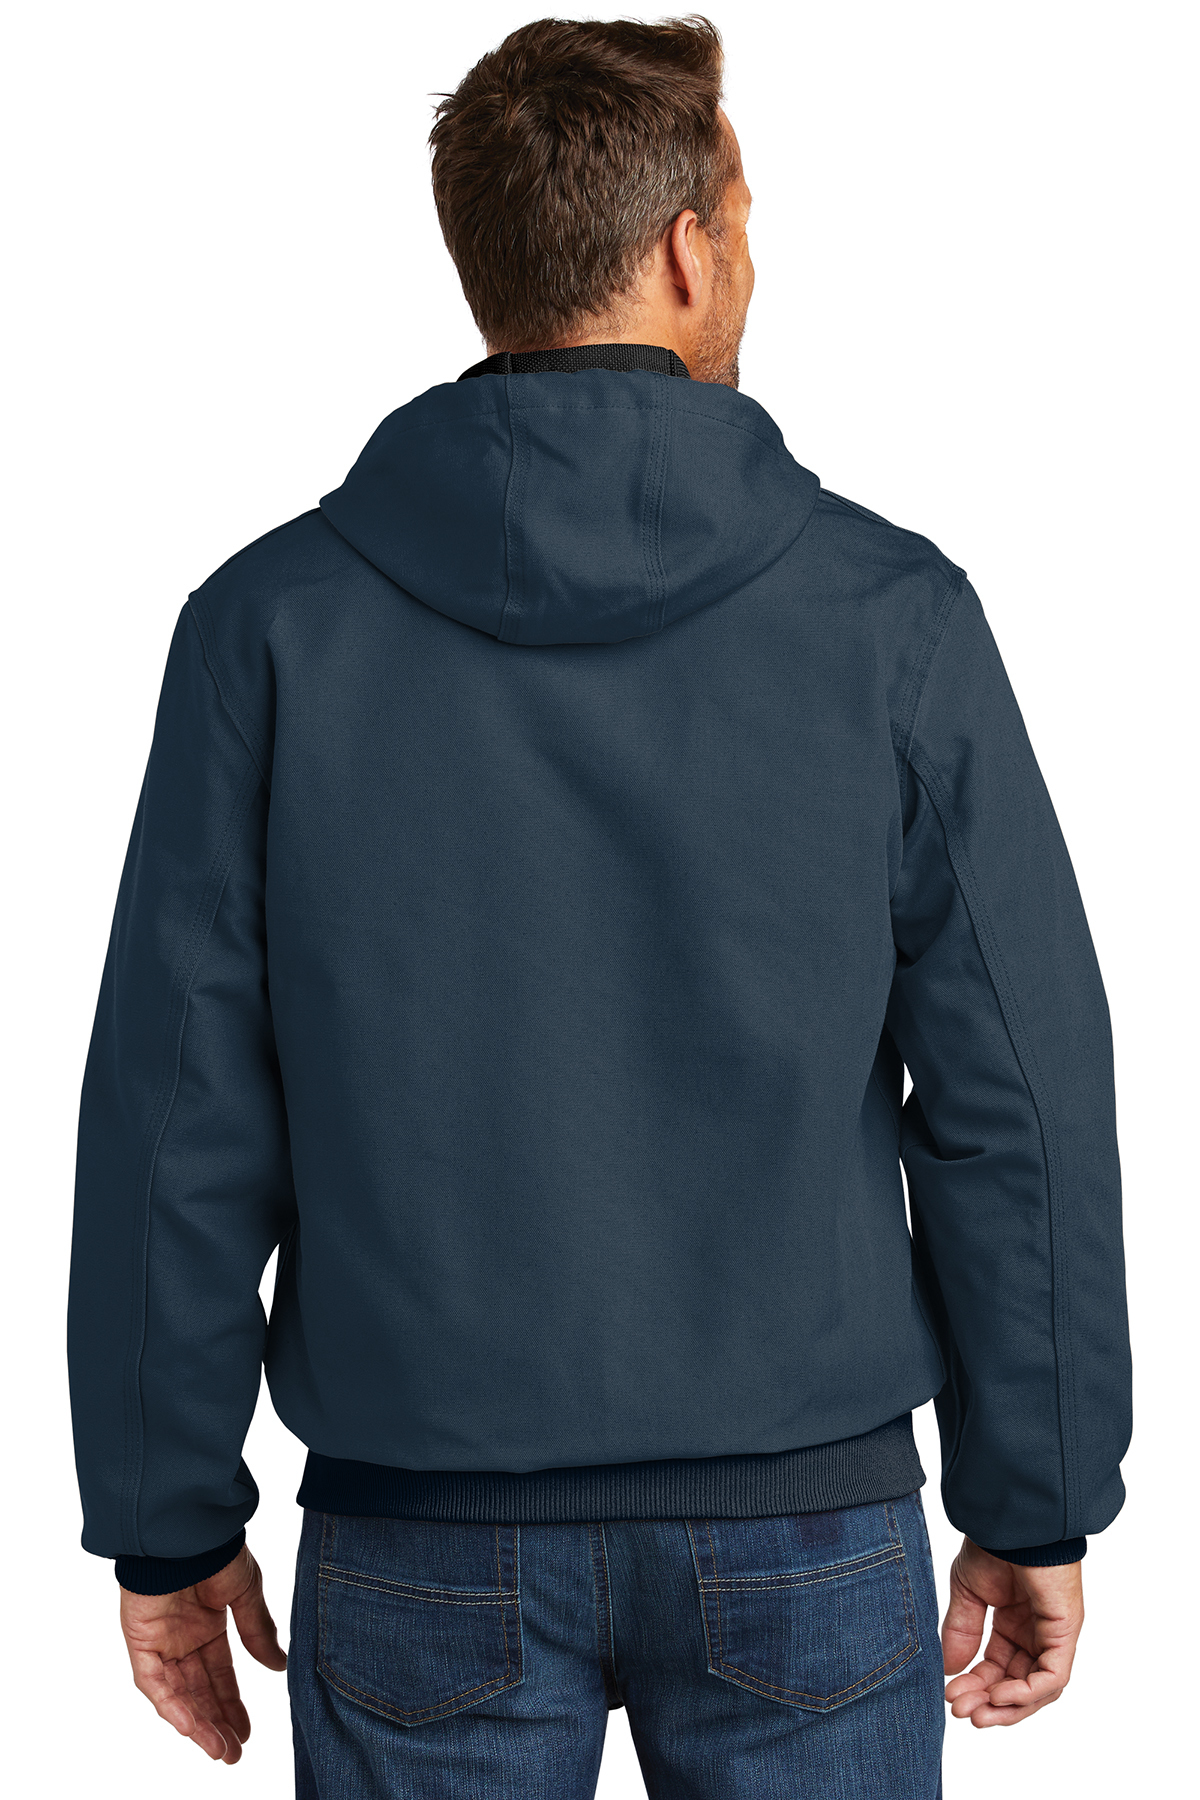 Carhartt Thermal-Lined Duck Active Jac | Product | SanMar